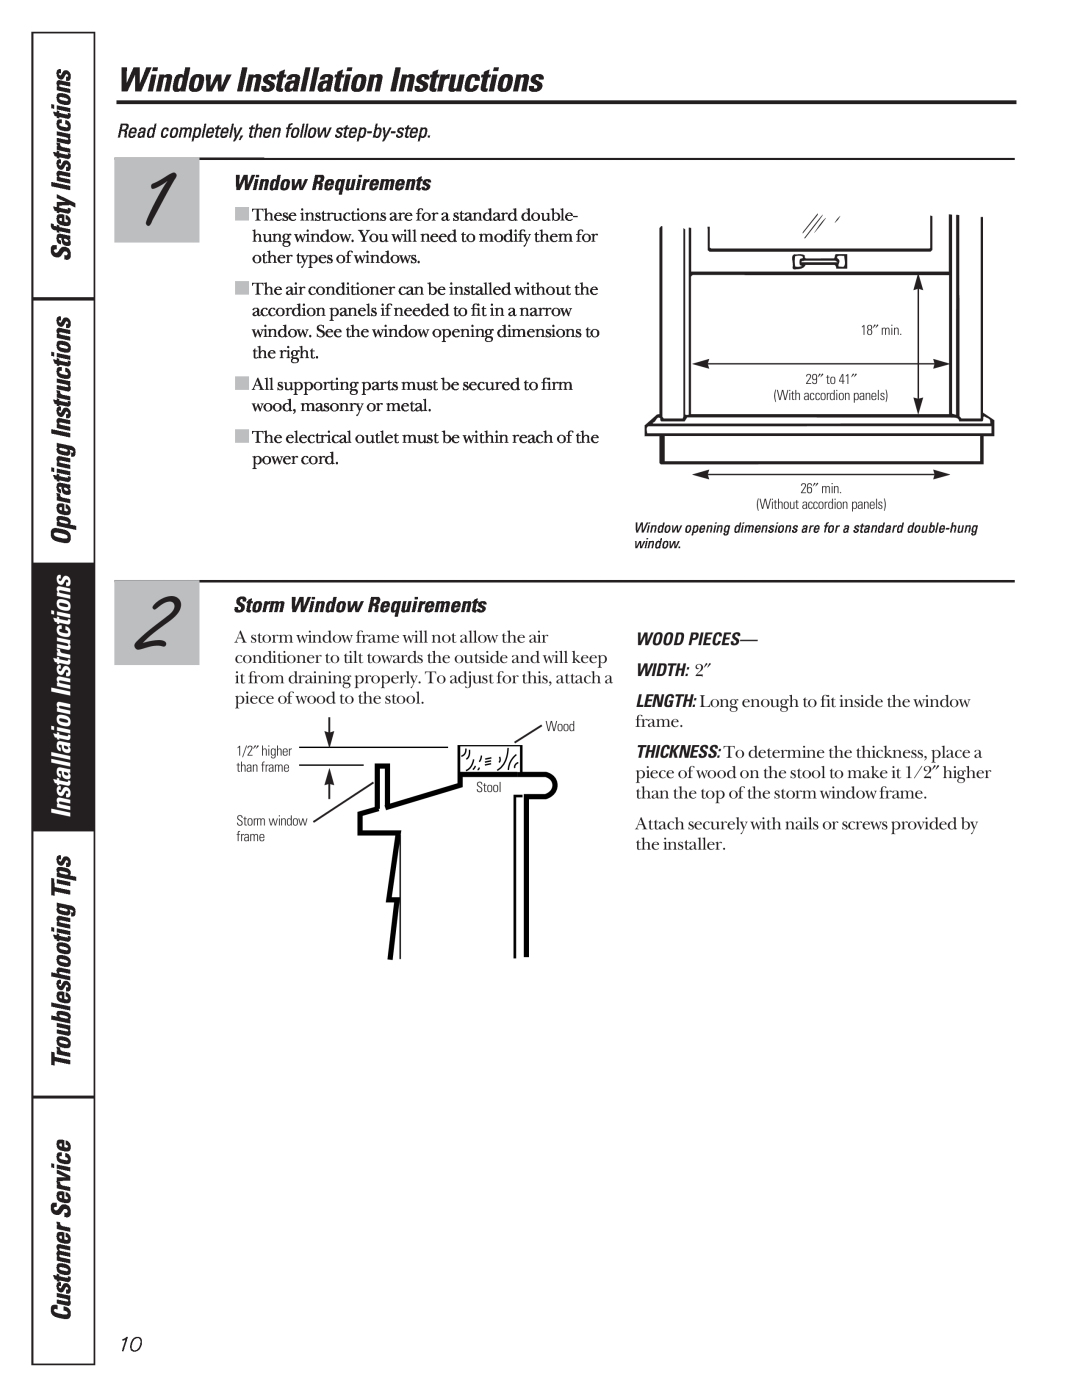 GE AG_18-18 Storm Window Requirements, Window Installation Instructions, CustomerService, WOOD PIECES WIDTH 2″ 